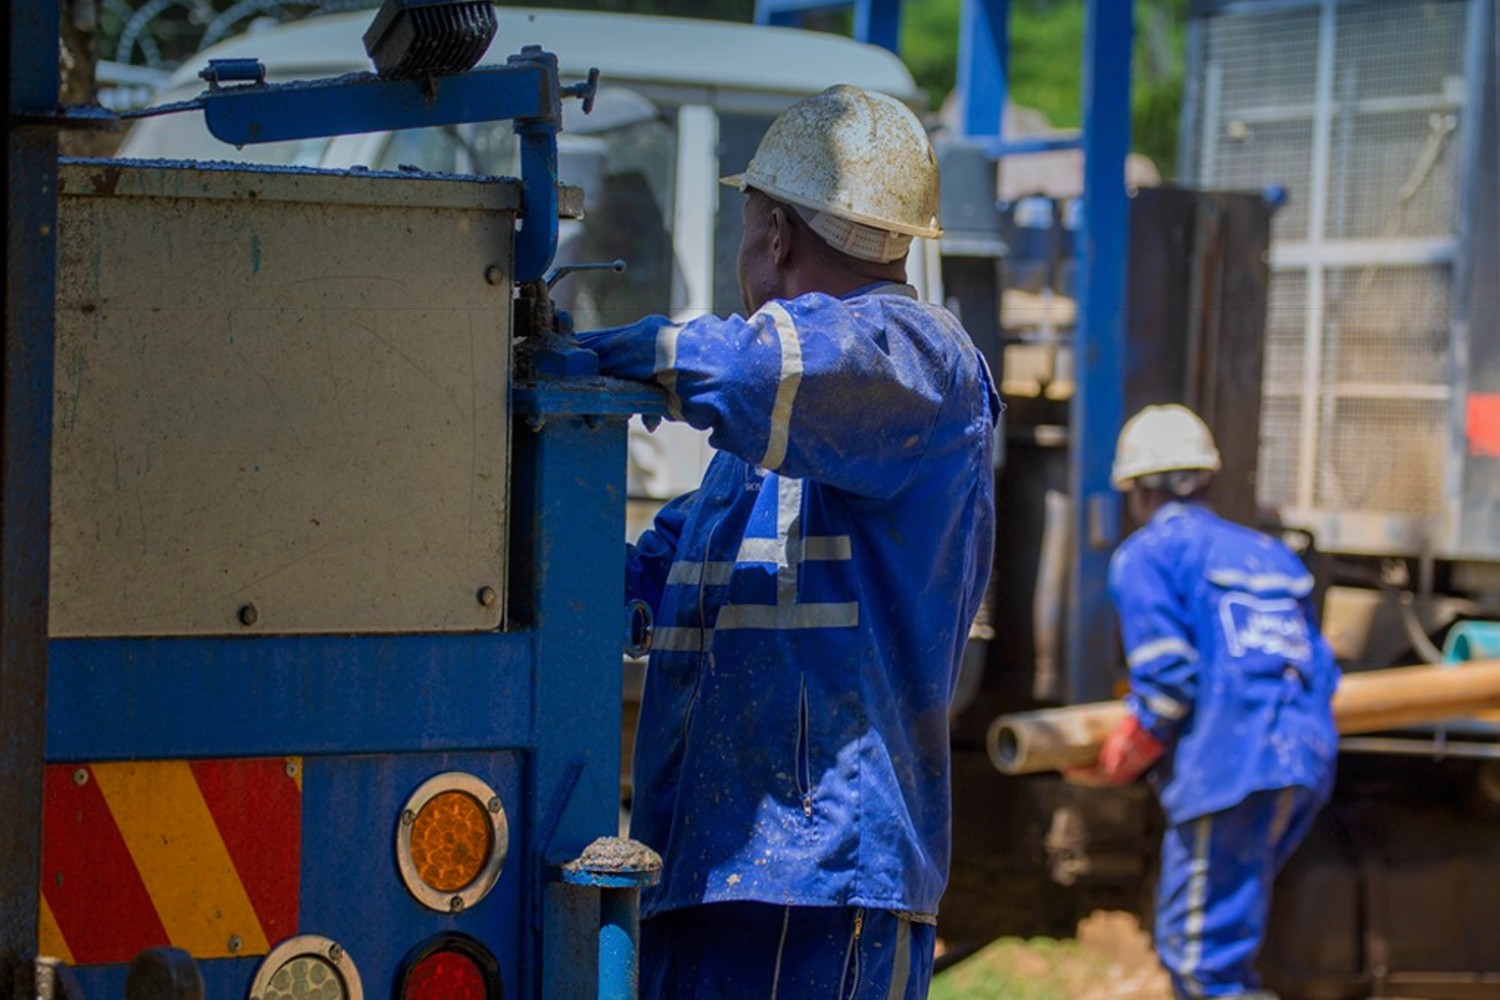 Skylake Borehole Drilling is One Of The Top Borehole Drilling Companies in Zimbabwe